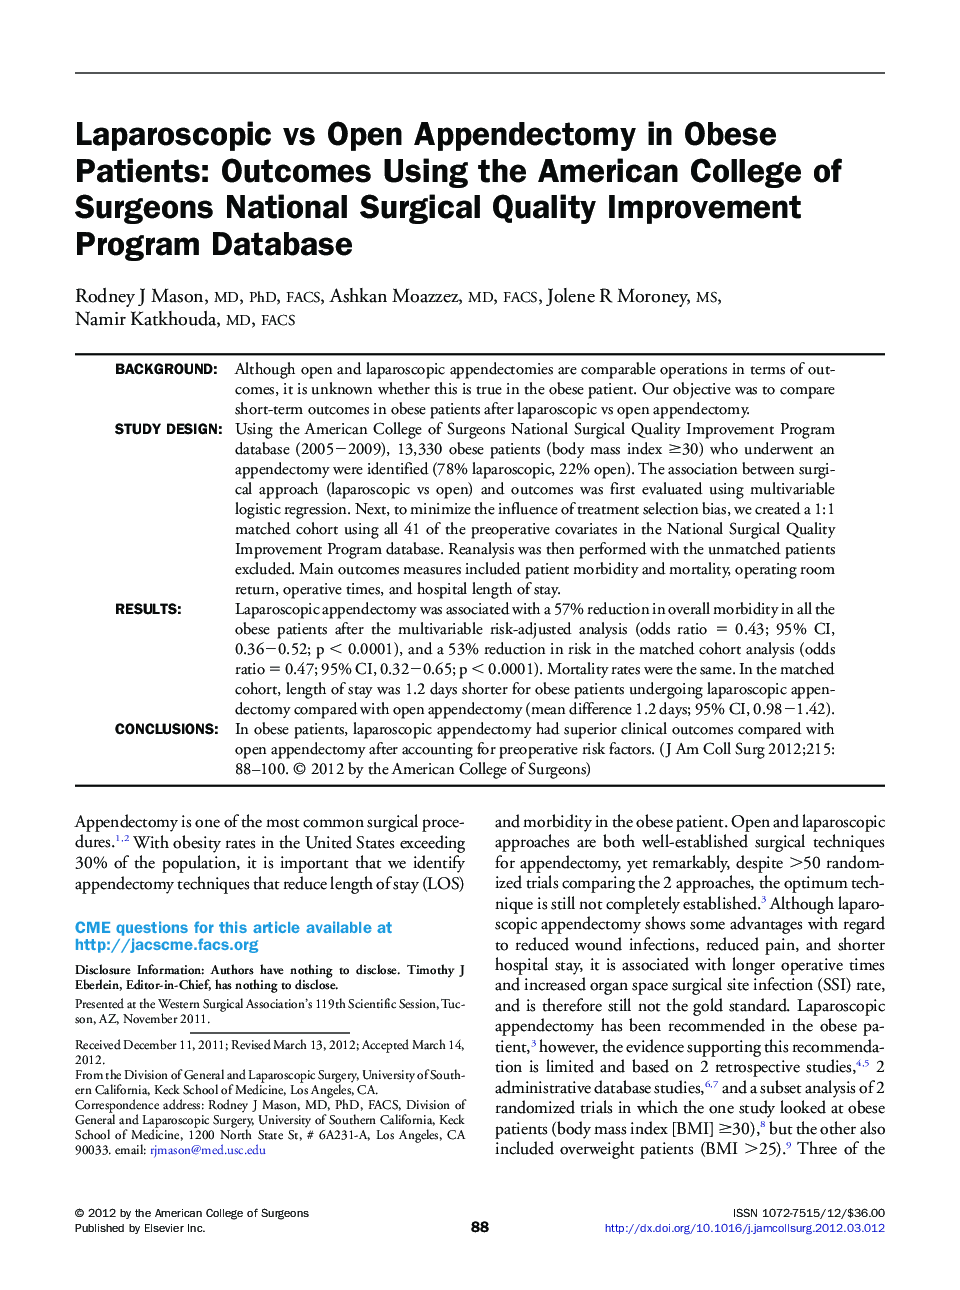 Laparoscopic vs Open Appendectomy in Obese Patients: Outcomes Using the American College of Surgeons National Surgical Quality Improvement Program Database 